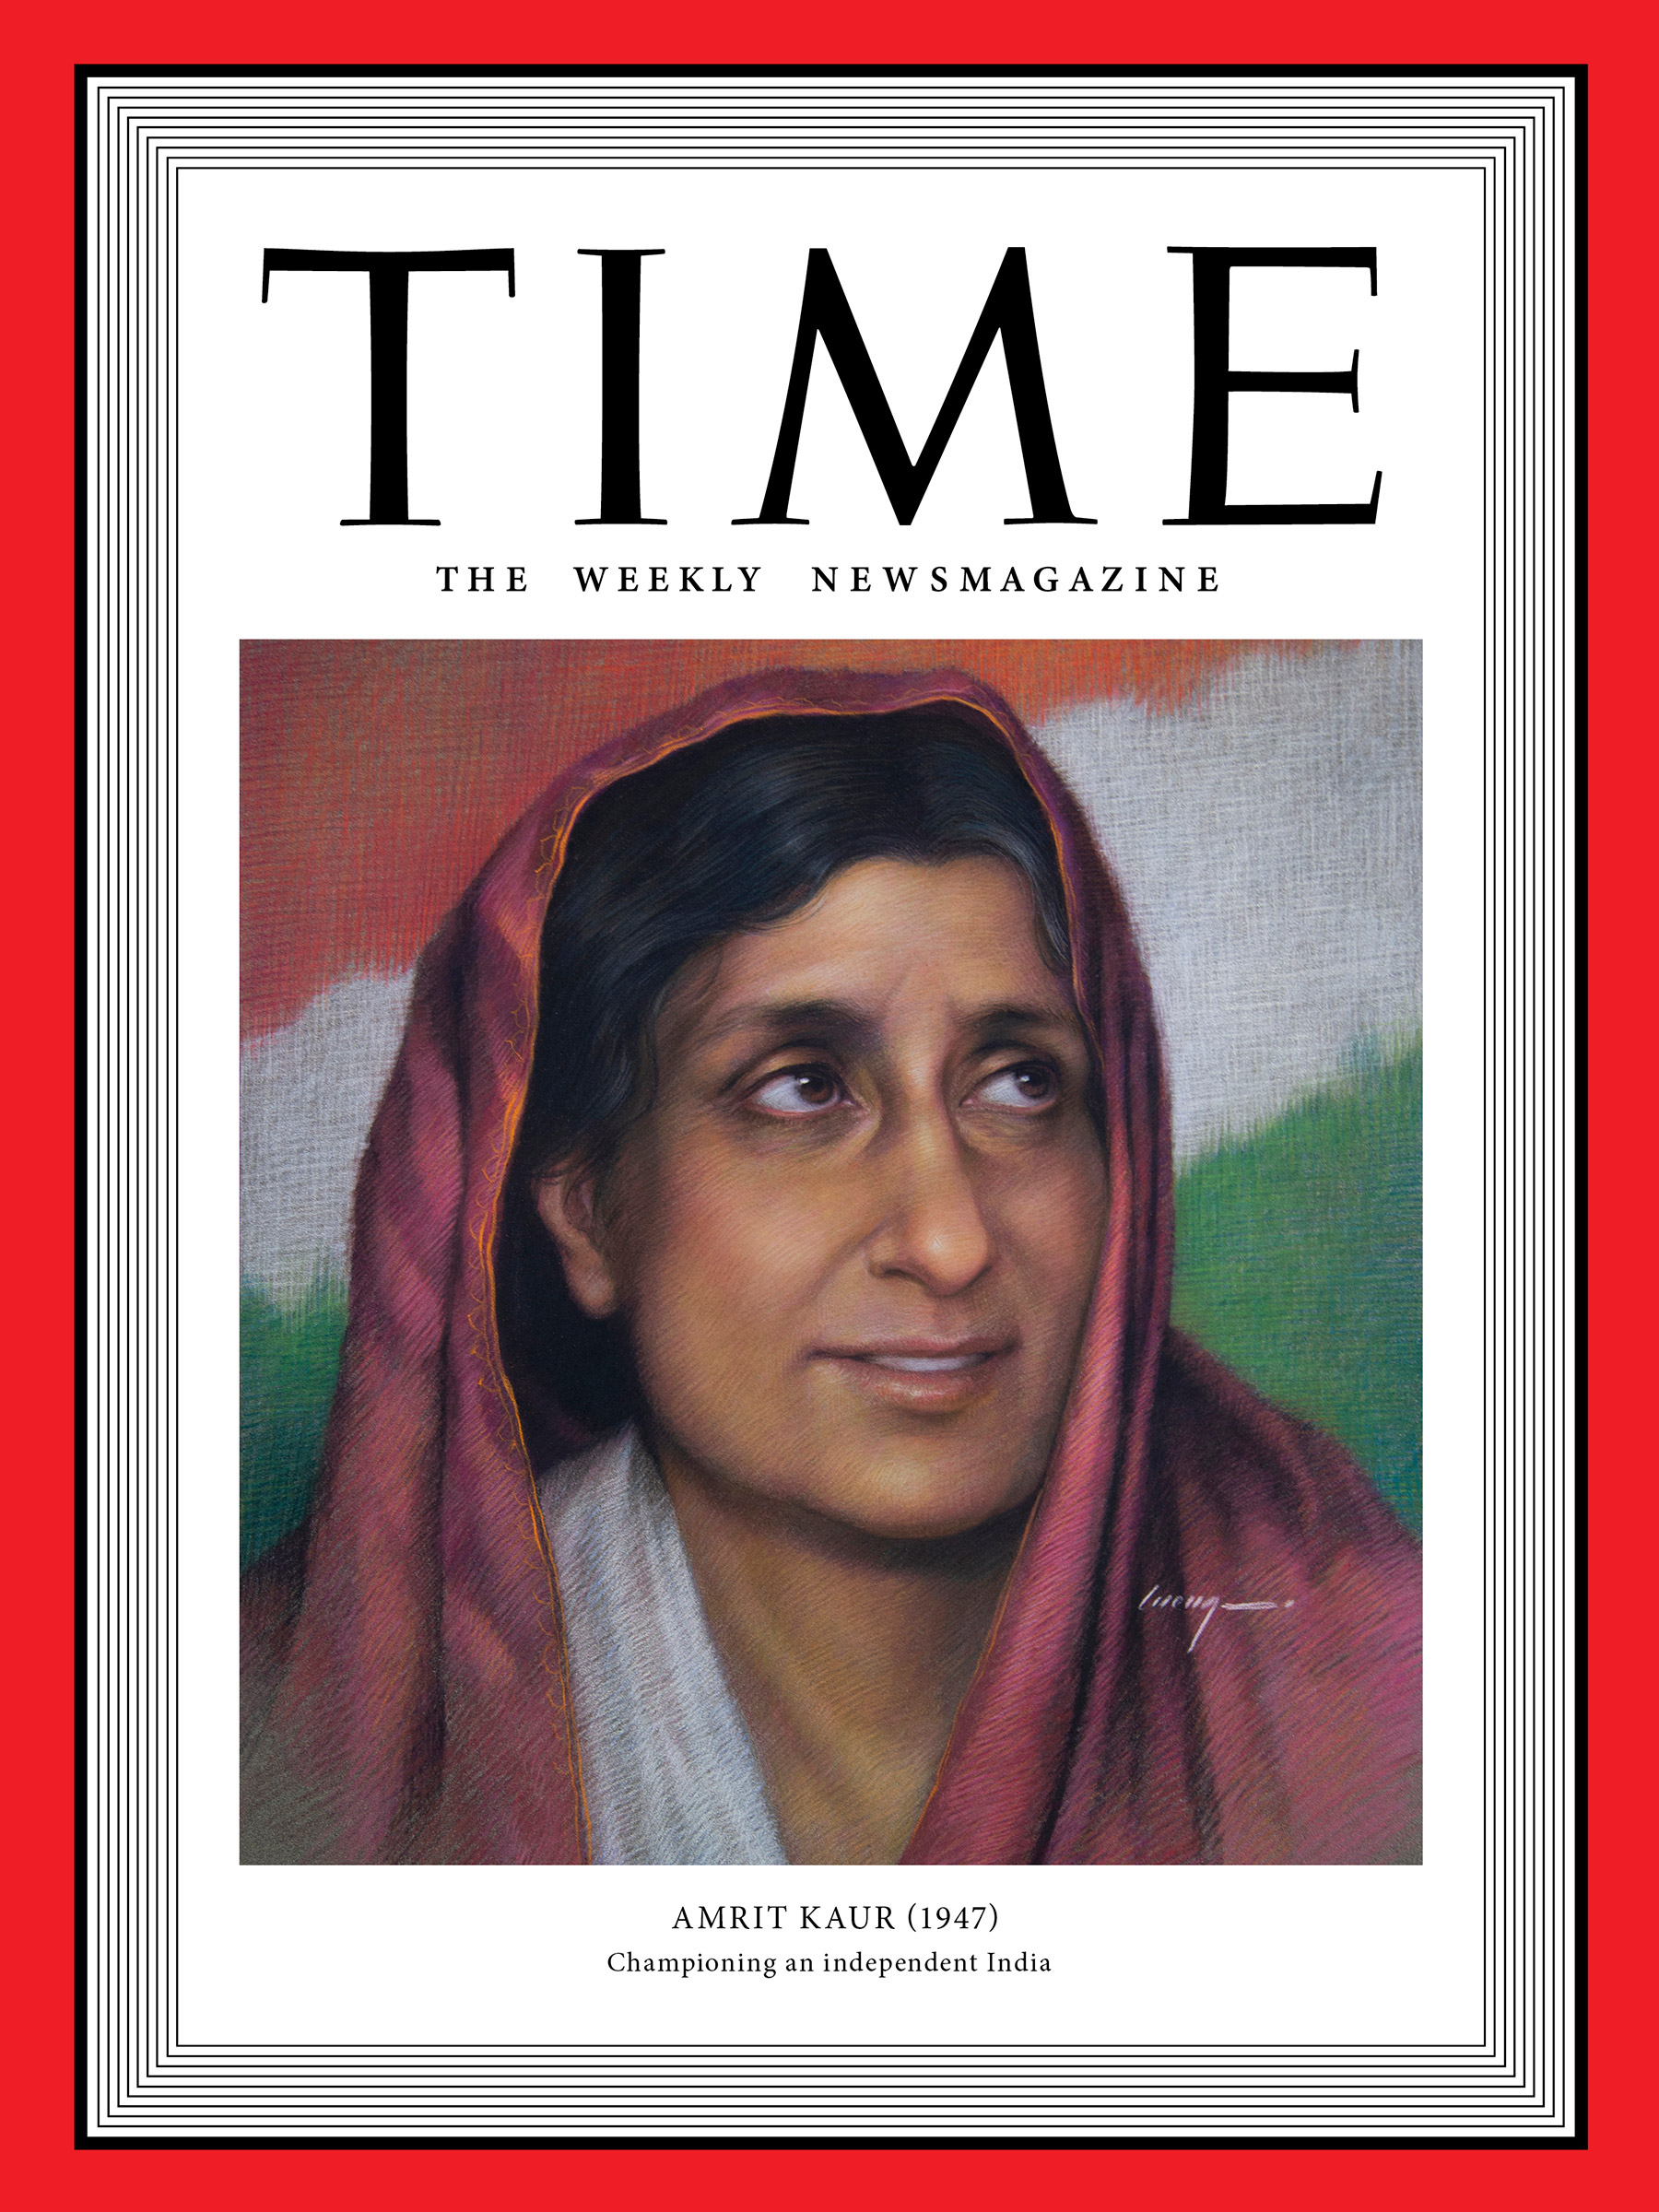 <a href="https://fineartamerica.com/featured/amrit-kaur-1947-time.html"><strong>Buy the cover art→</strong></a> (Painting by Cuong Nguyen; Associated Newspapers/Shutterstock)